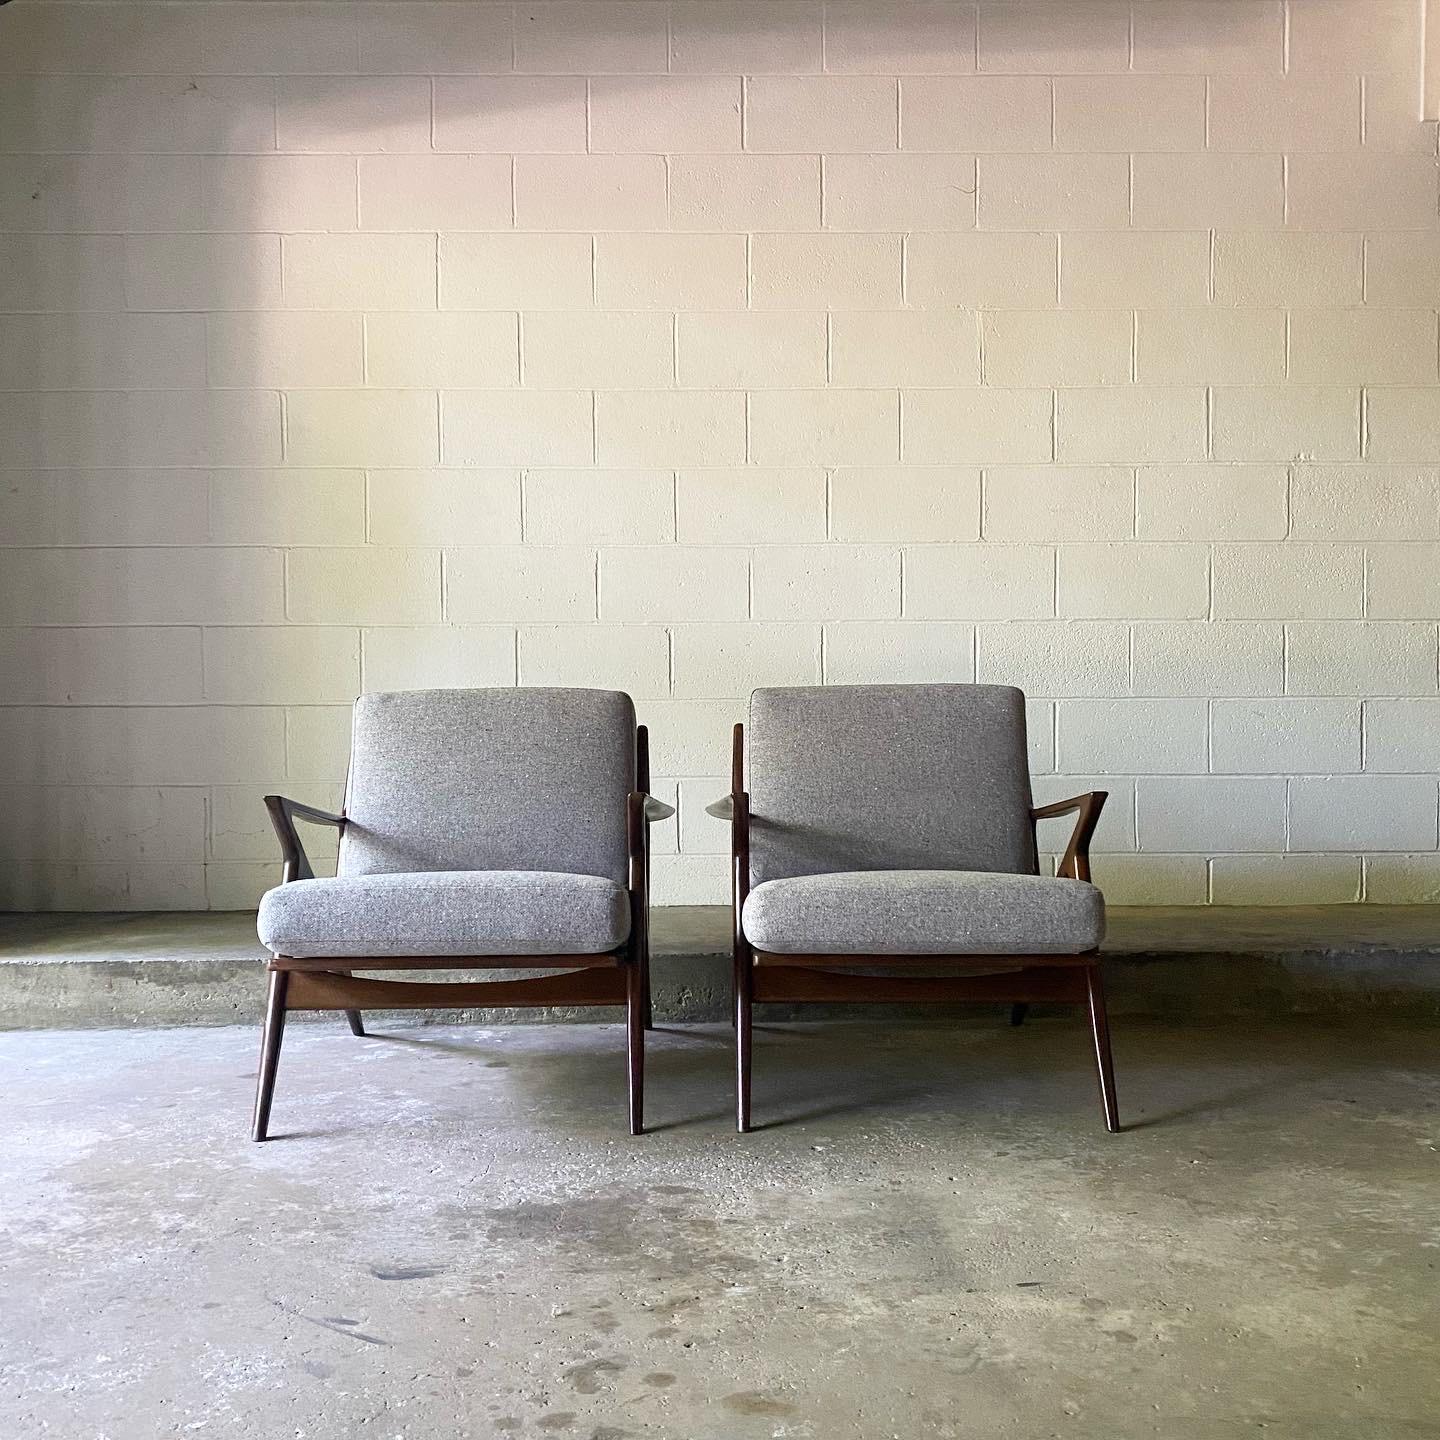 This is an exceptional all original pair of “Z” chairs designed by Poul Jensen for Selig, ca. 1950’s Denmark. The frames are constructed of solid beech wood, finished in a walnut lacquer. The cushions are brand new, professionally upholstered in a